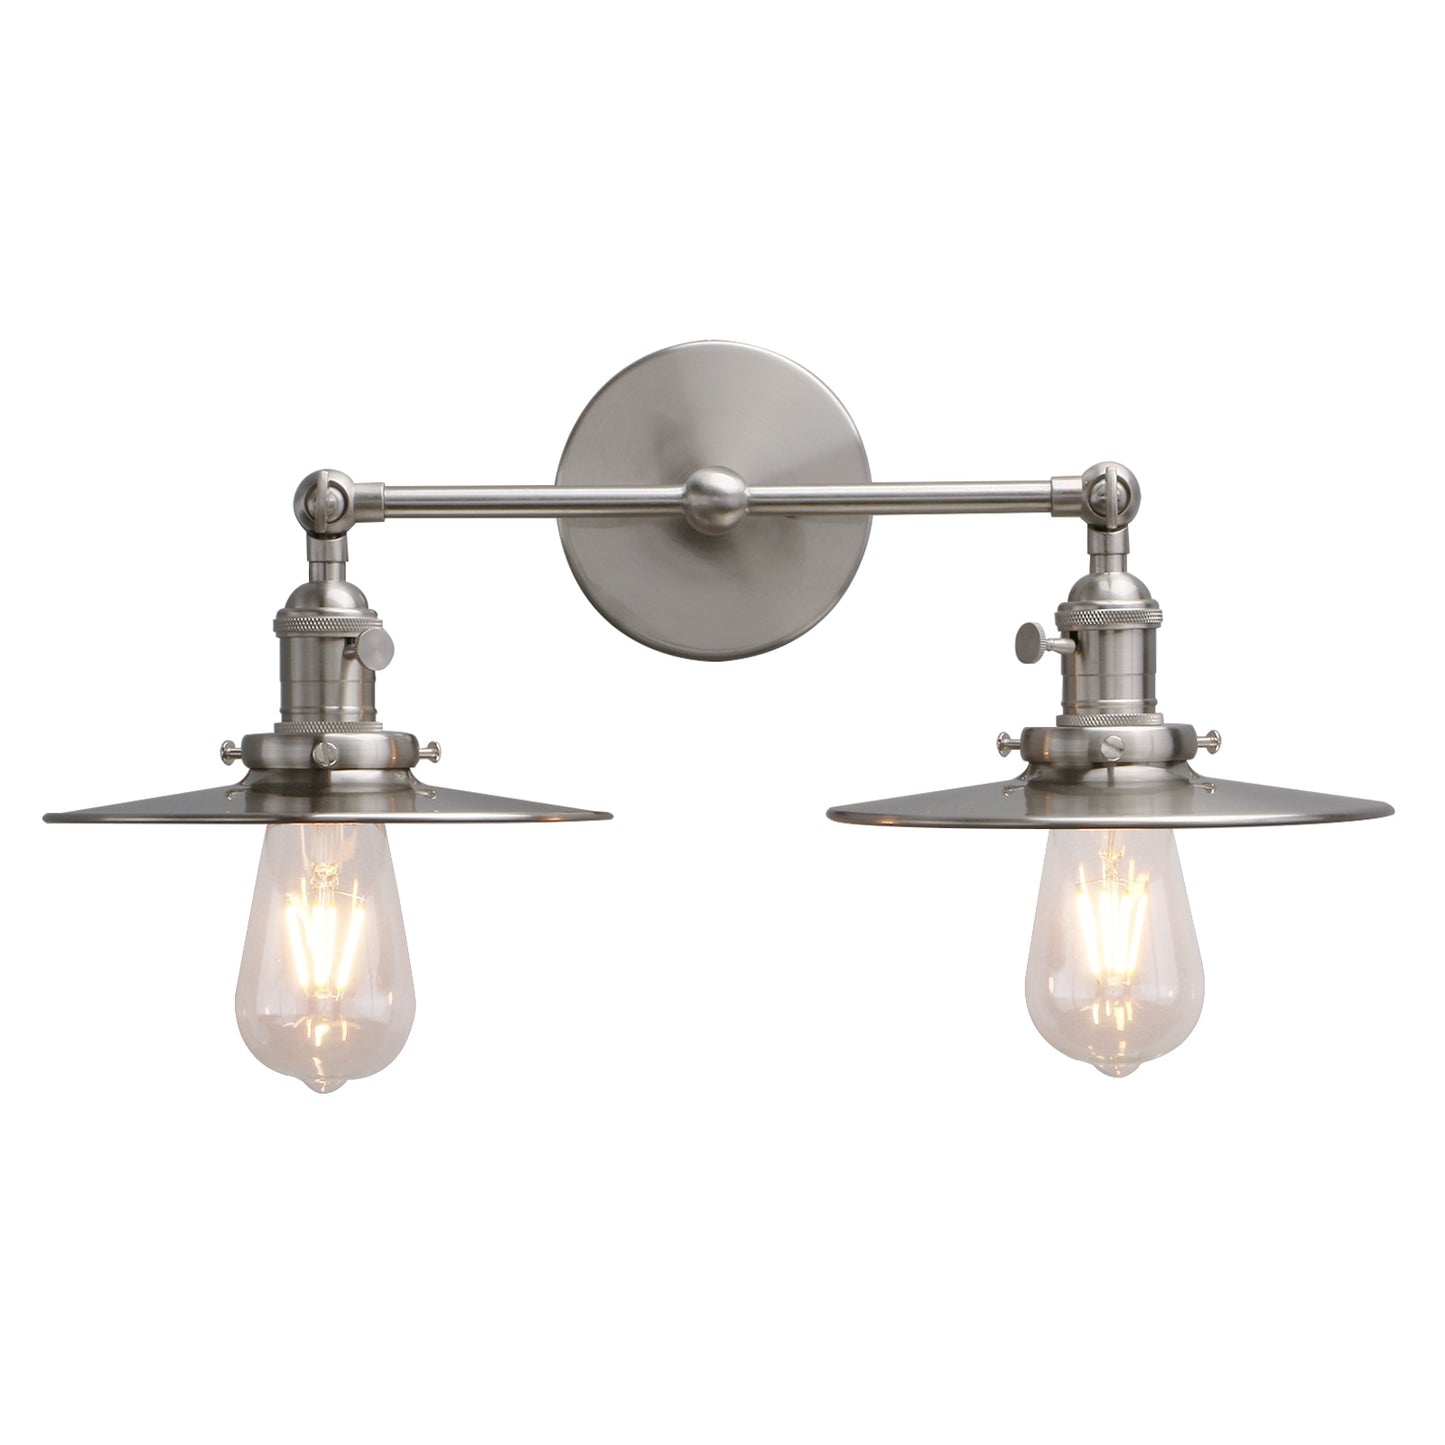 Brushed nickel vintage double wall sconce with flat shade and Edison bulb